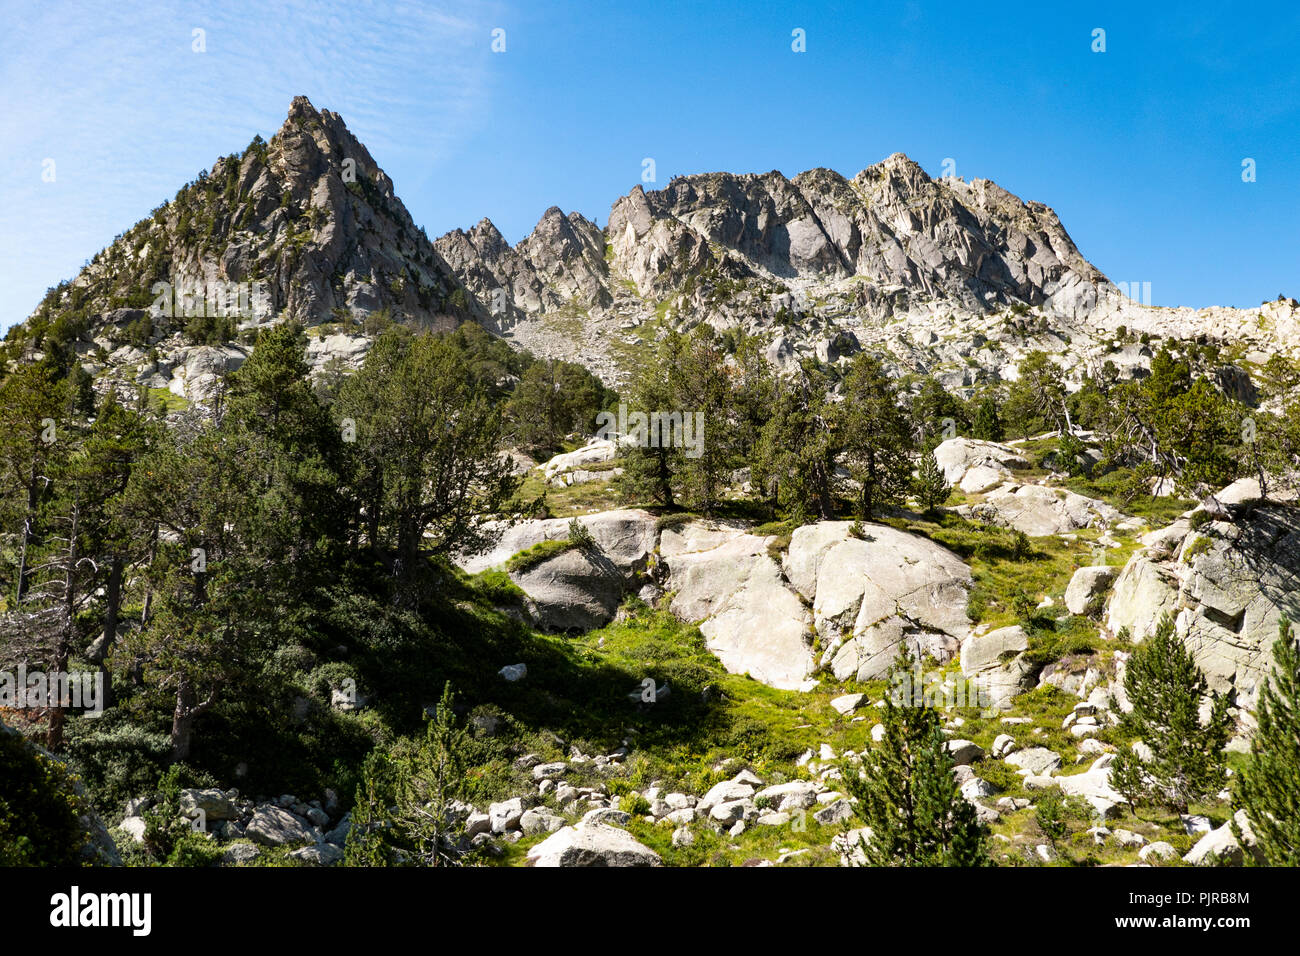 National Park Aiguestortes in Pyrenees Mountains, Catalonia, Spain. Stock Photo